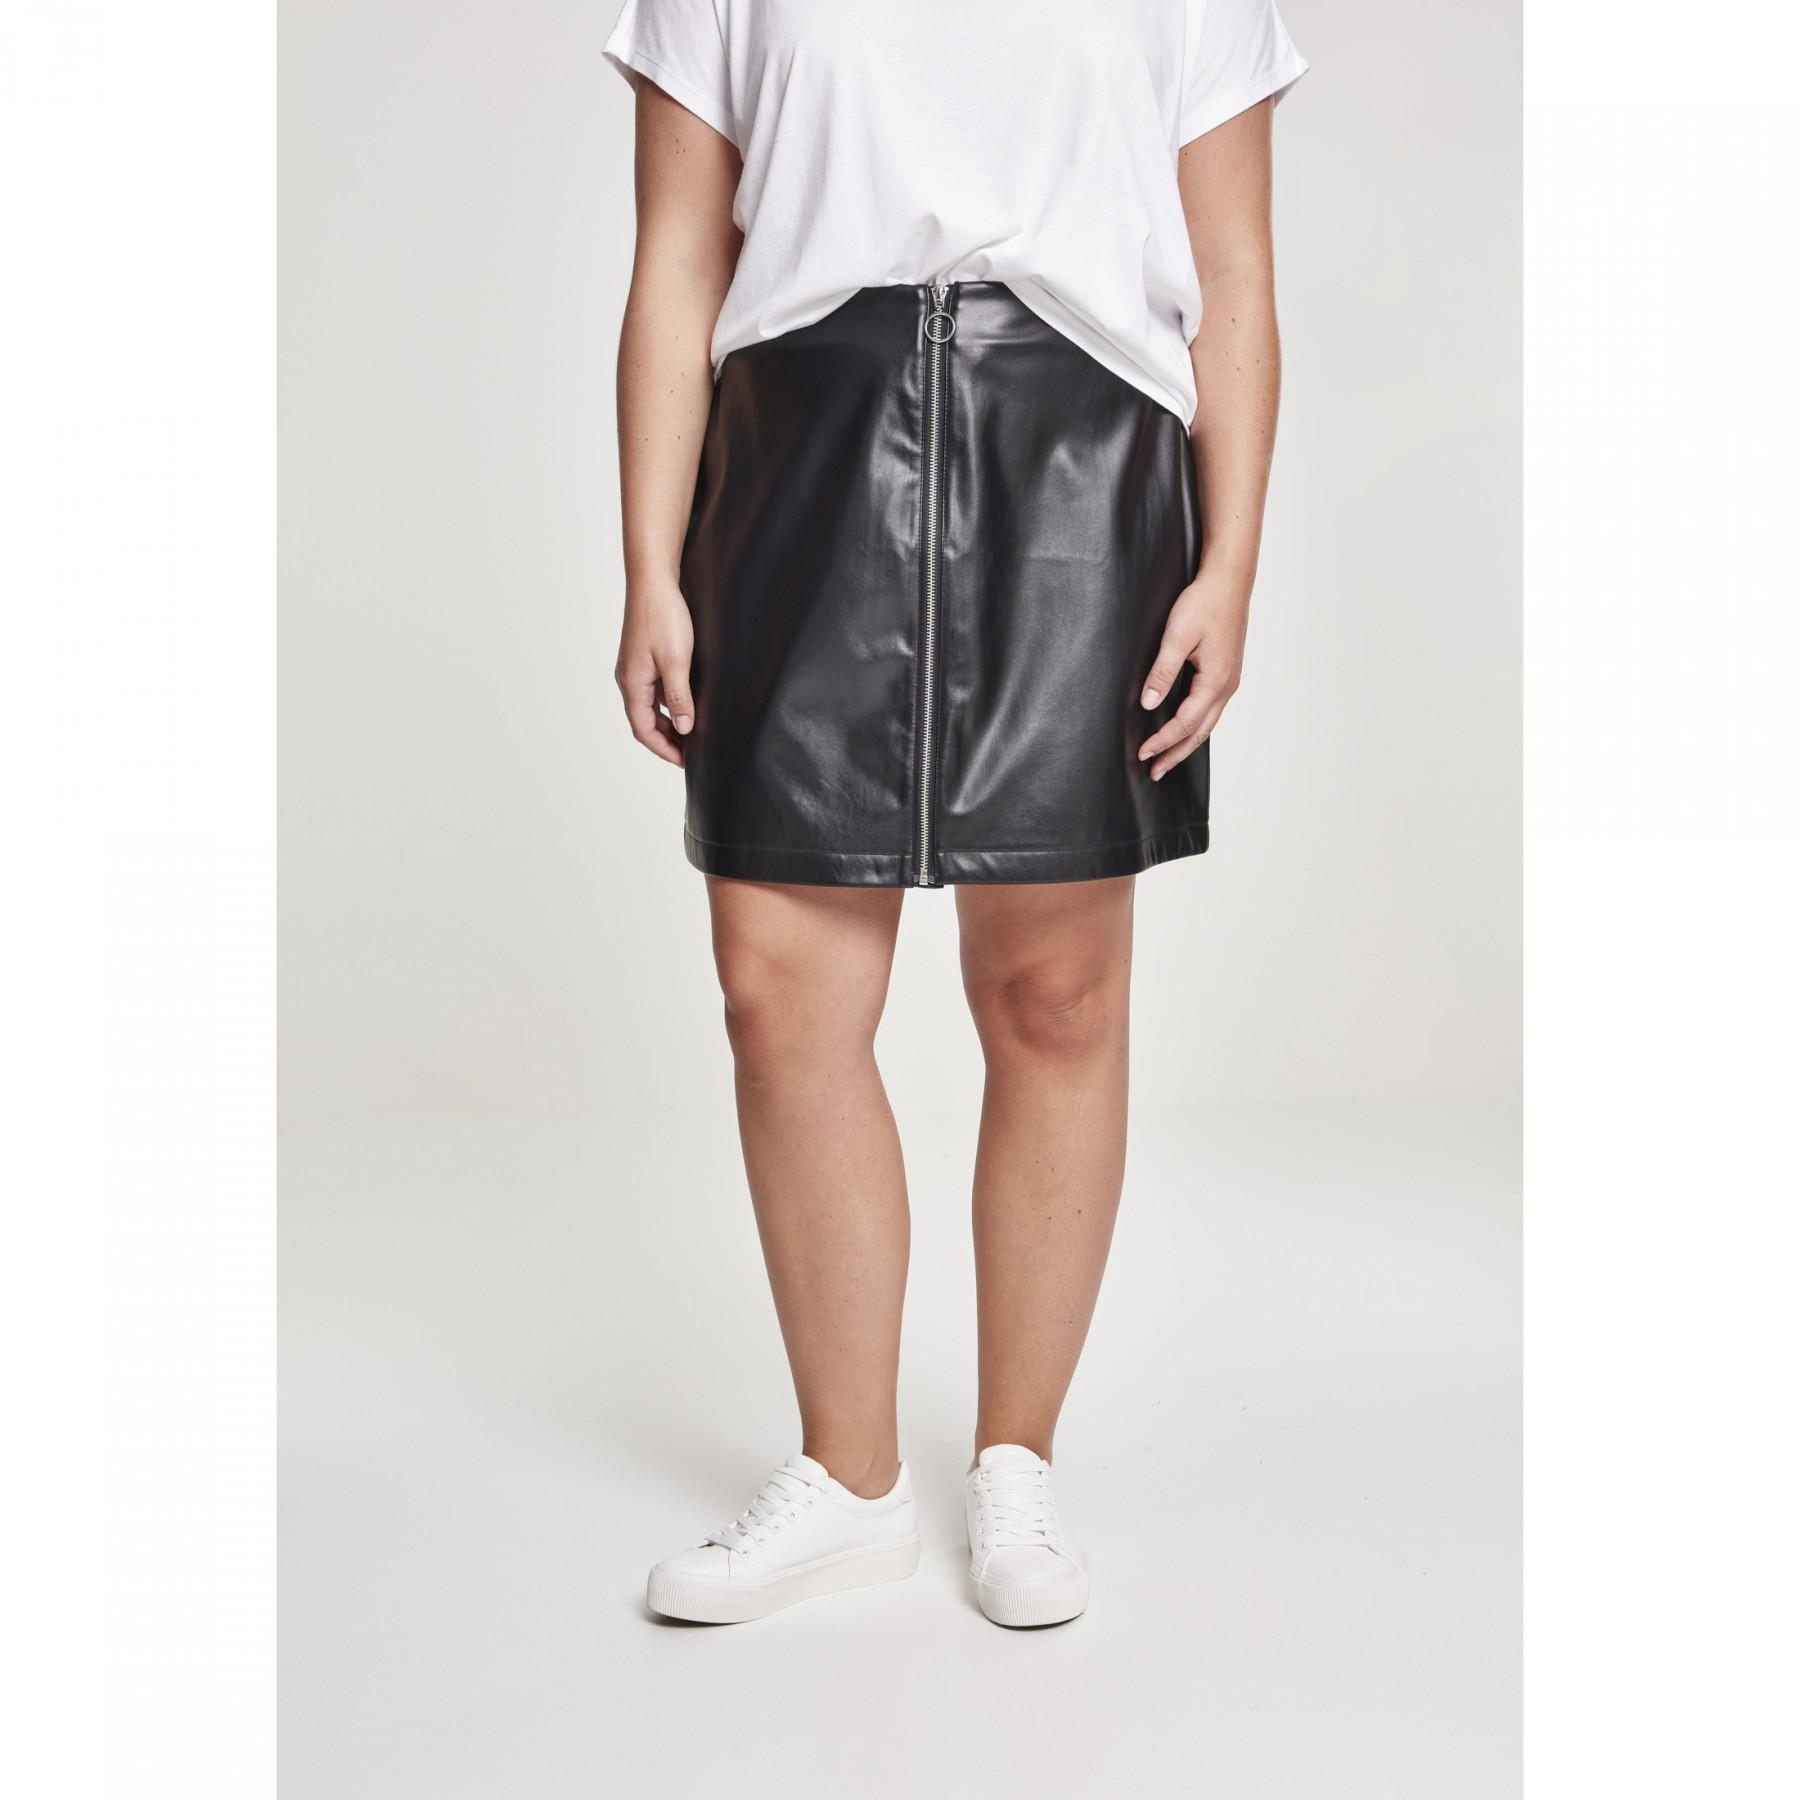 Women's Urban Classic faux leather GT skirt